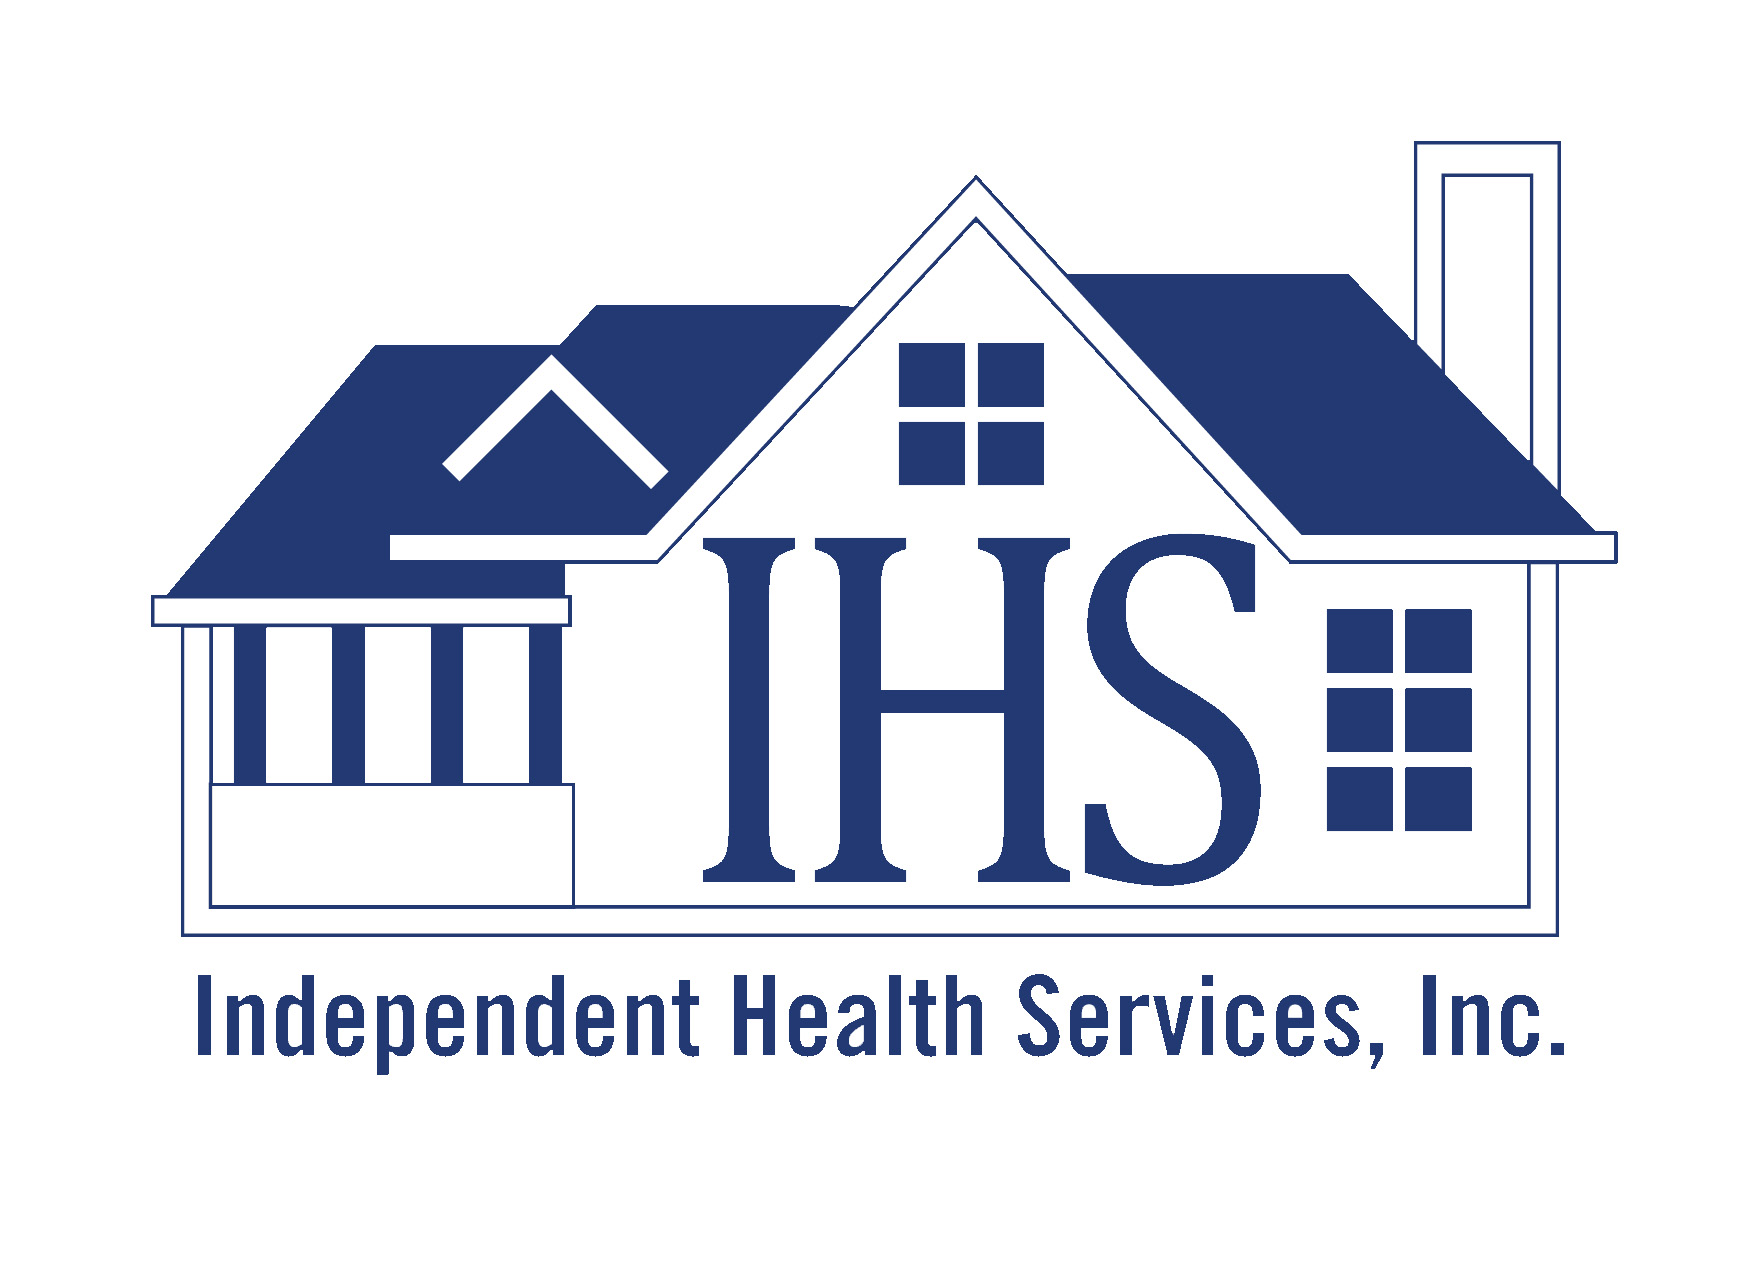 Independent Health Services